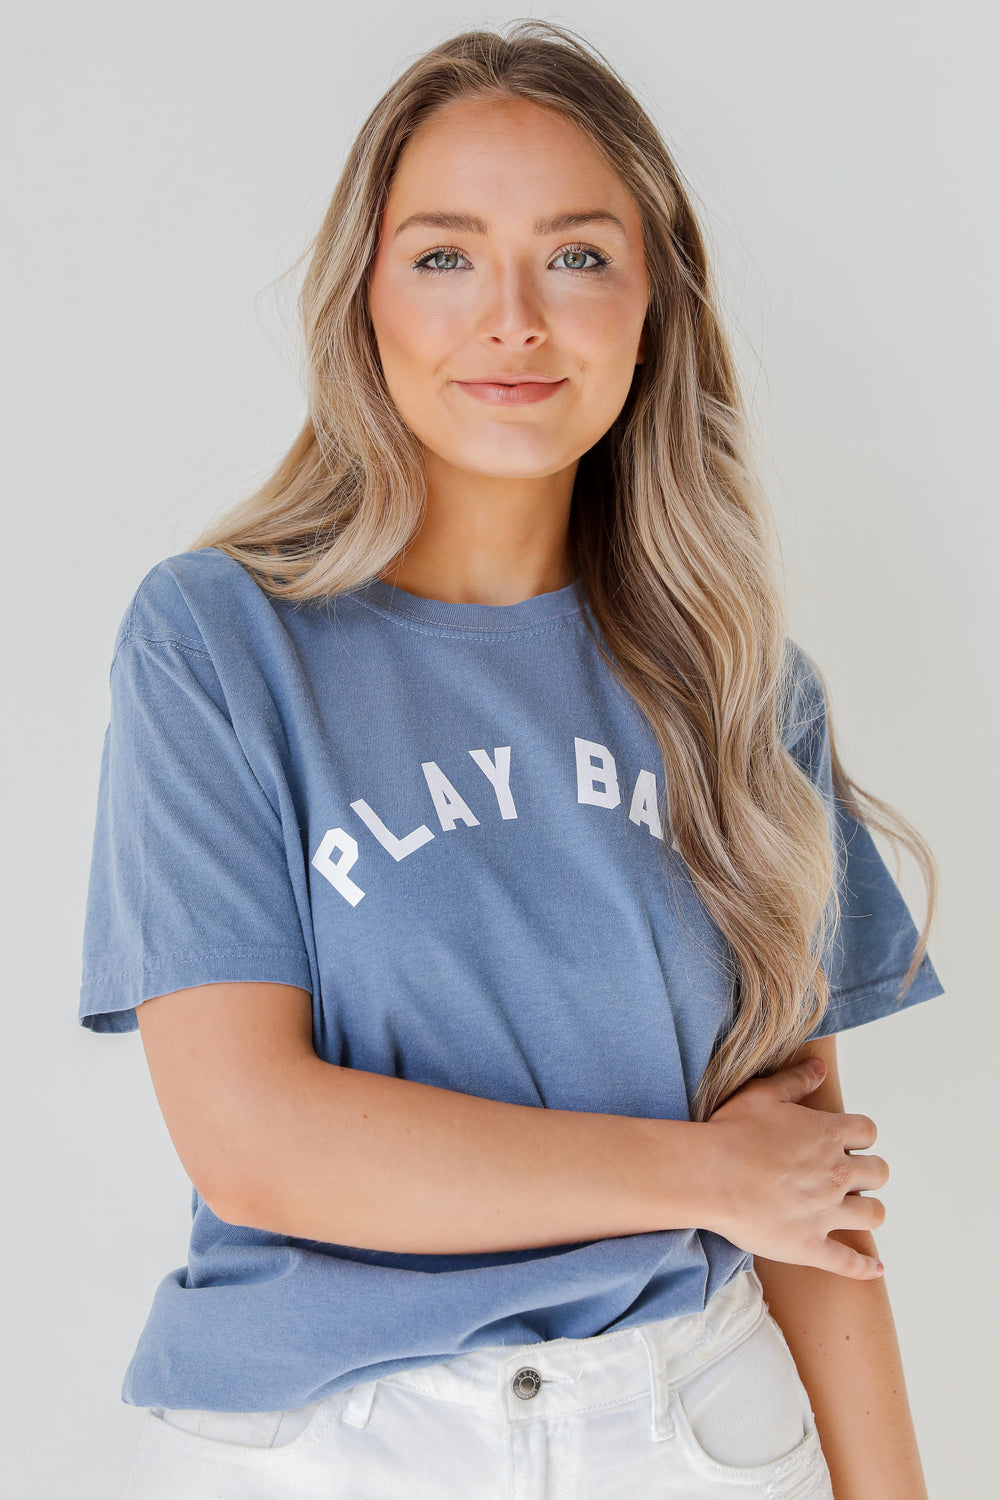 Navy Play Ball Tee from dress up